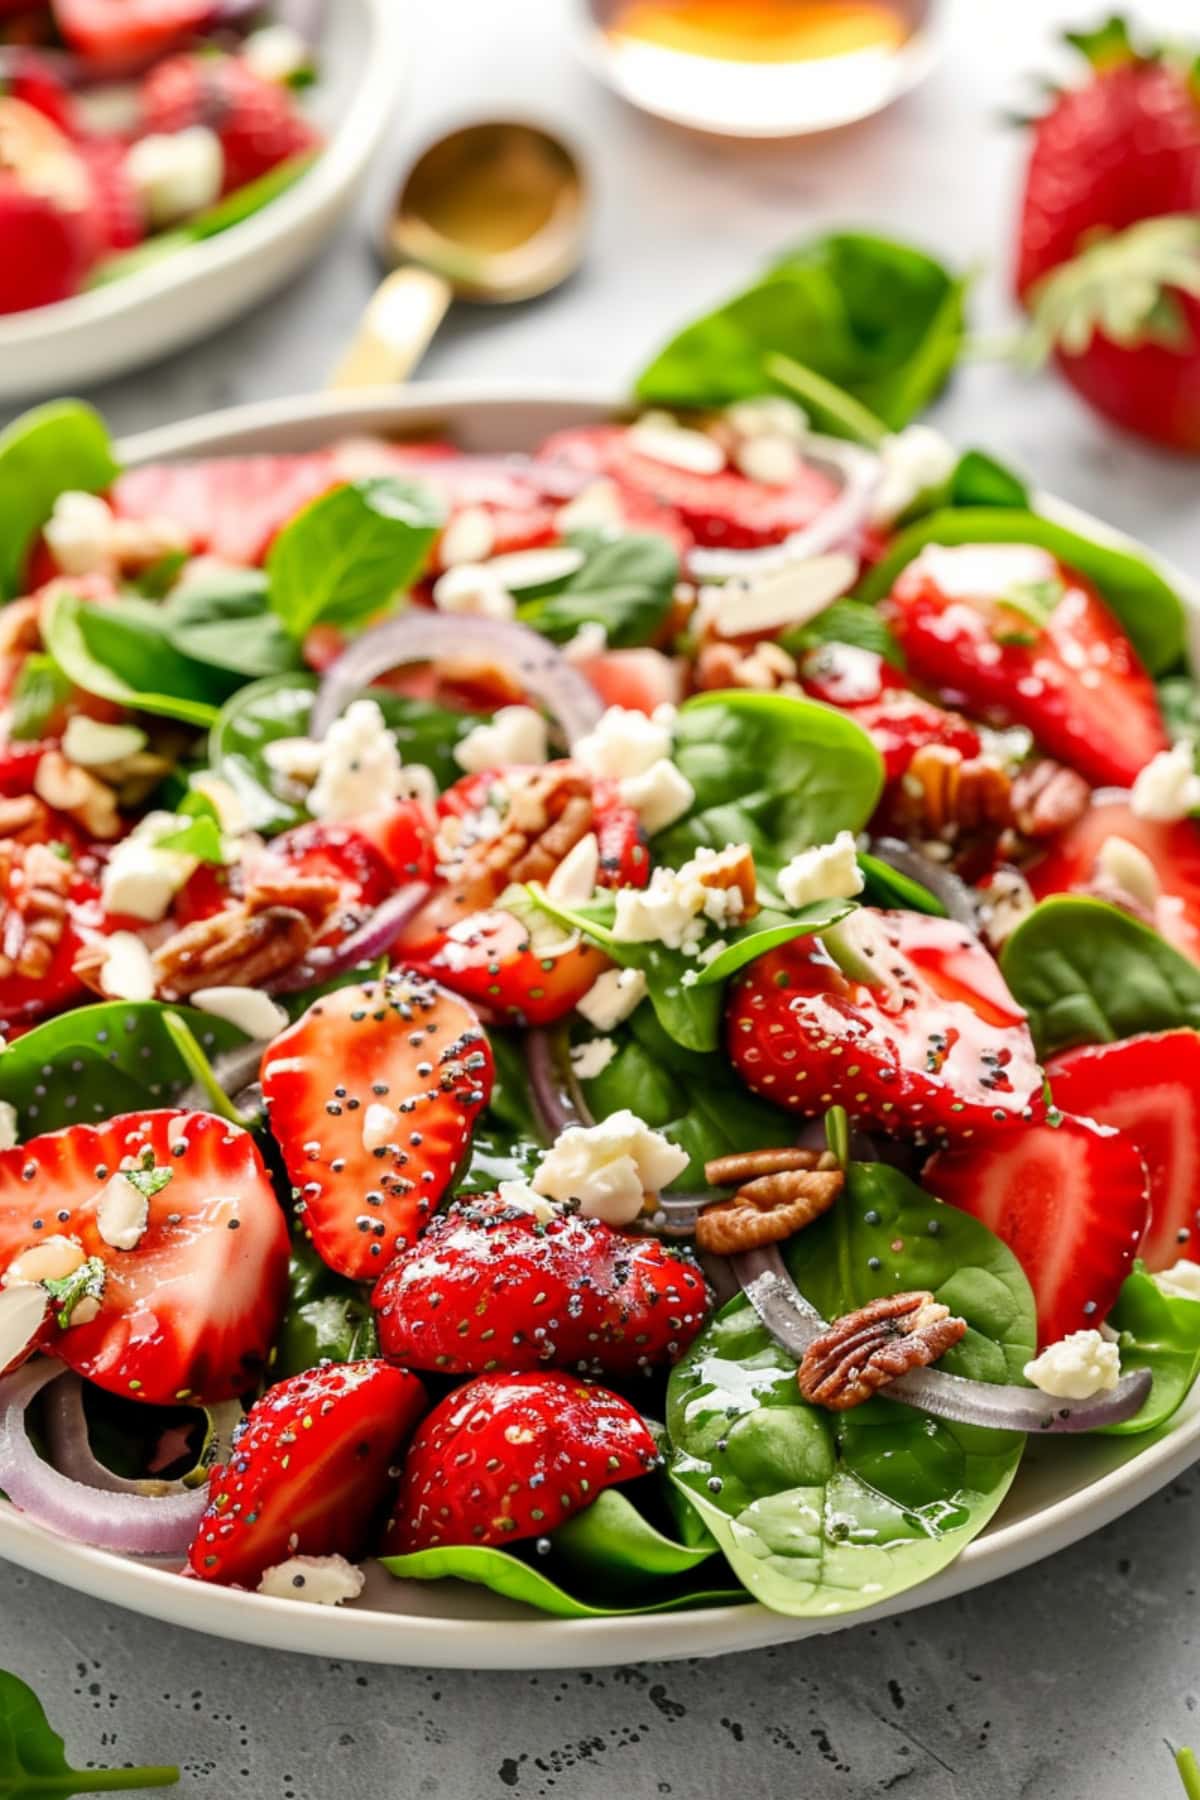 Spinach Strawberry Salad with Poppy Seed Dressing served in a white plate.